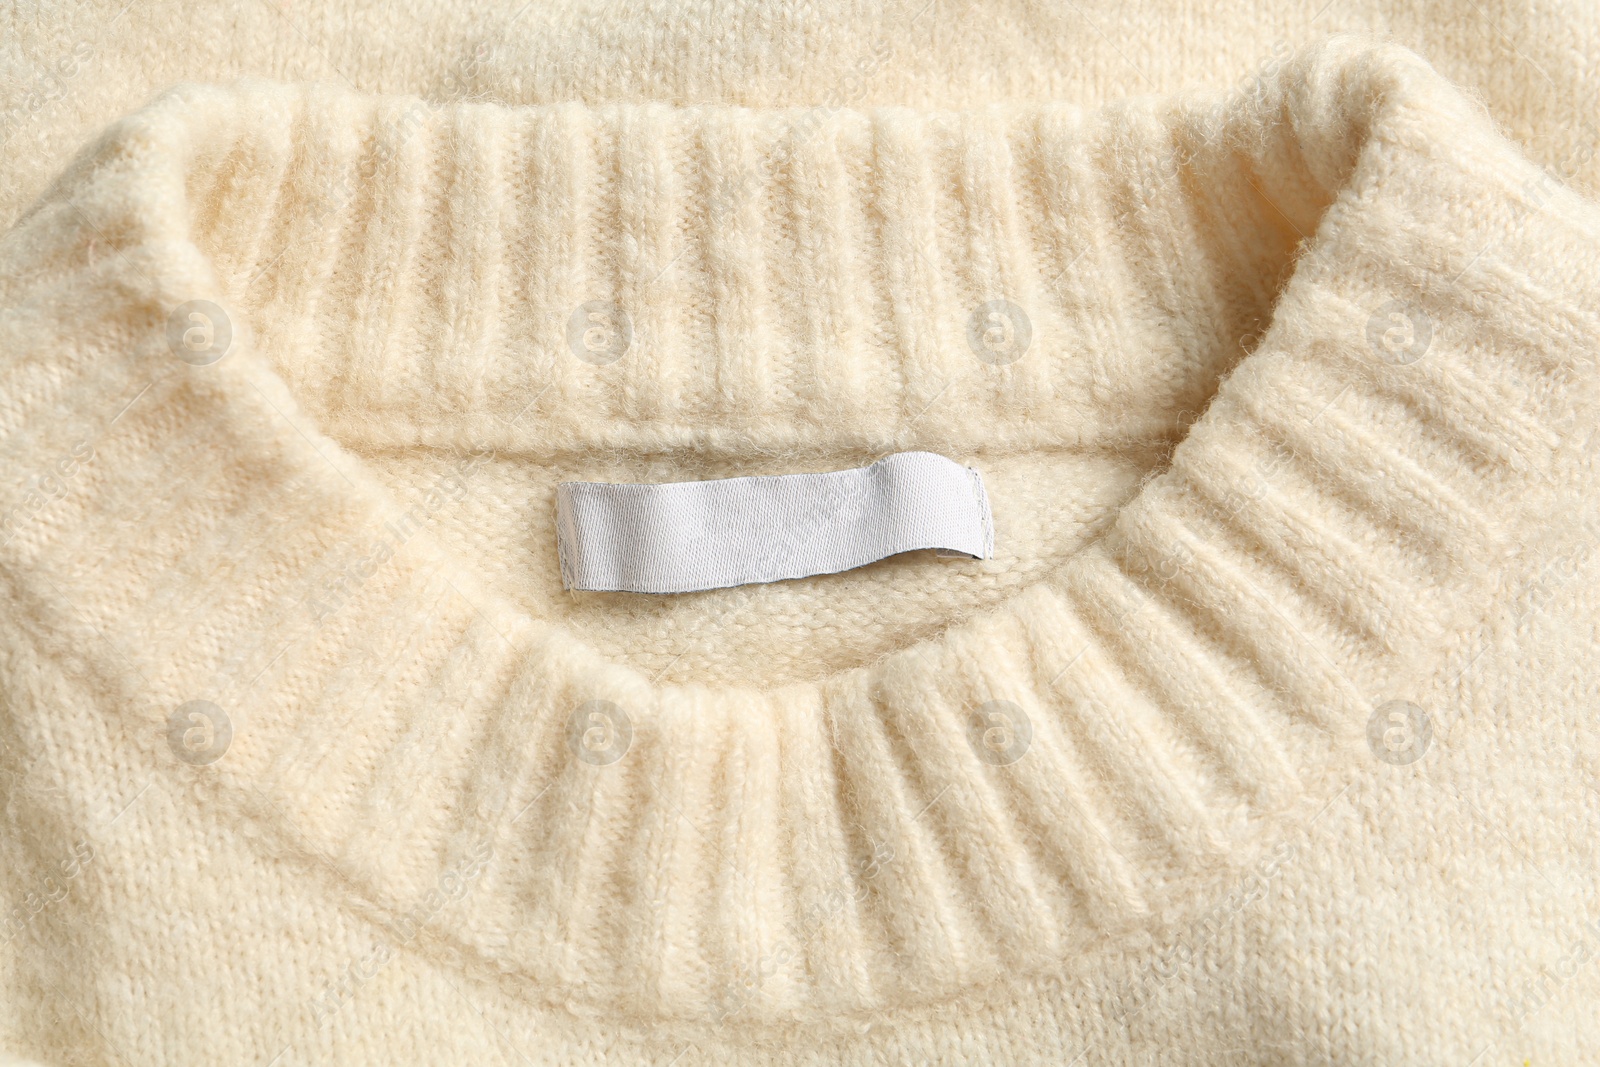 Photo of Blank clothing label on white cashmere sweater, top view